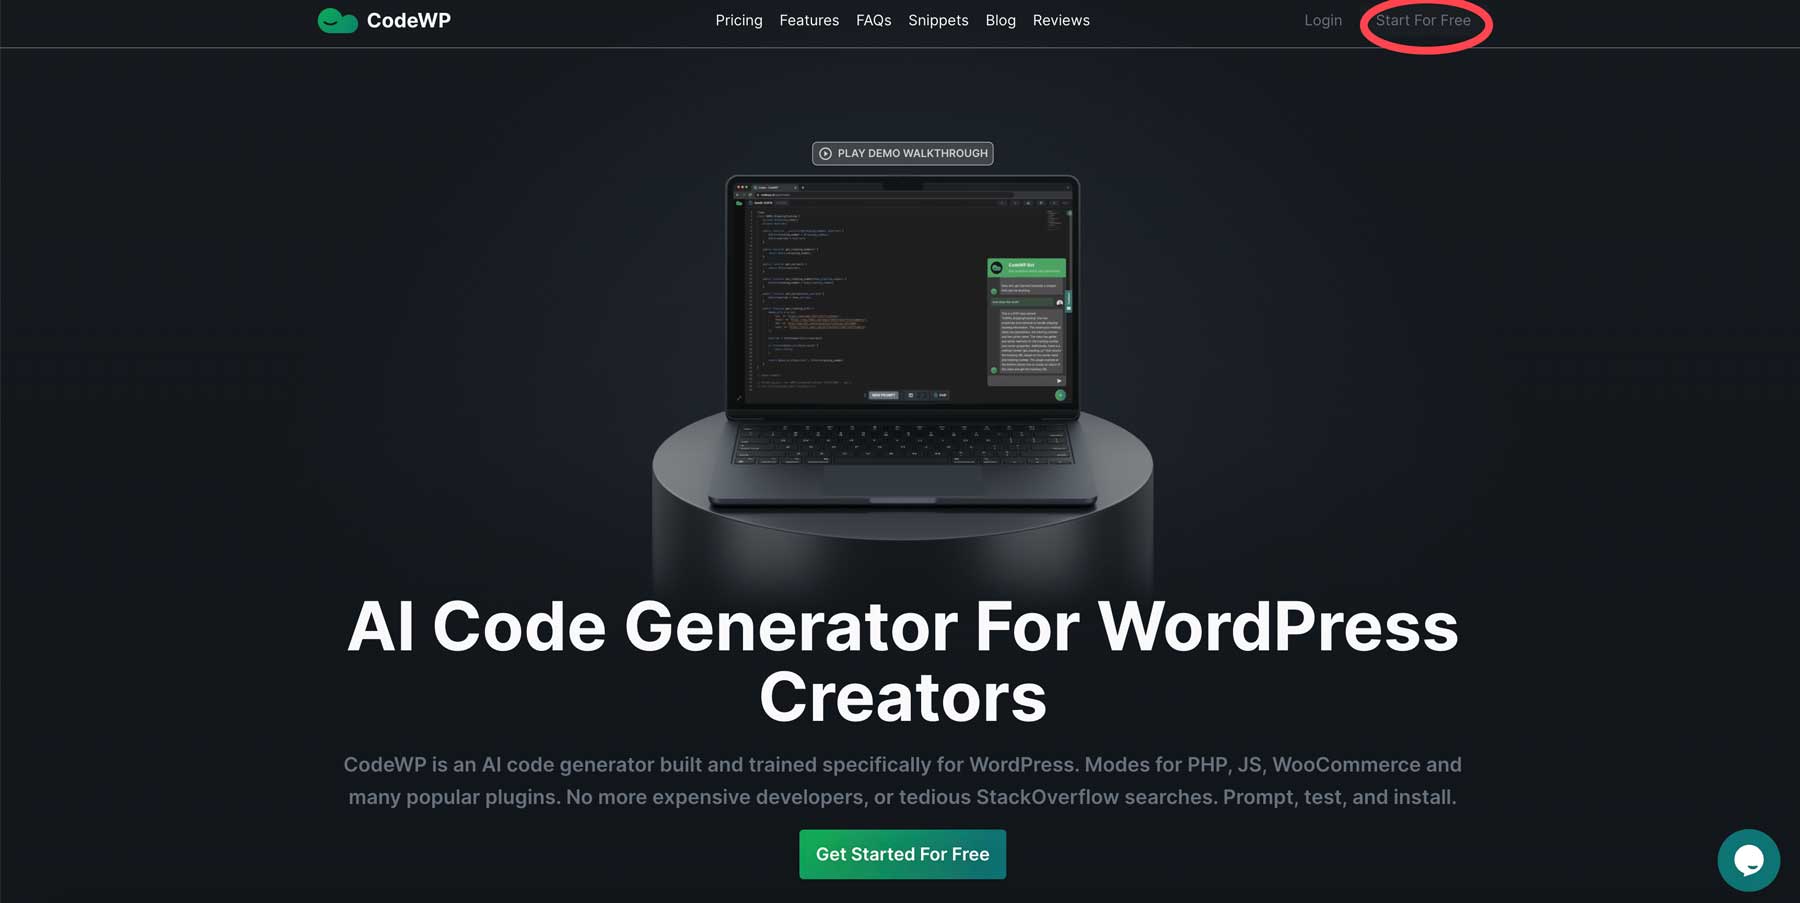 How to make your code more beautiful on WordPress